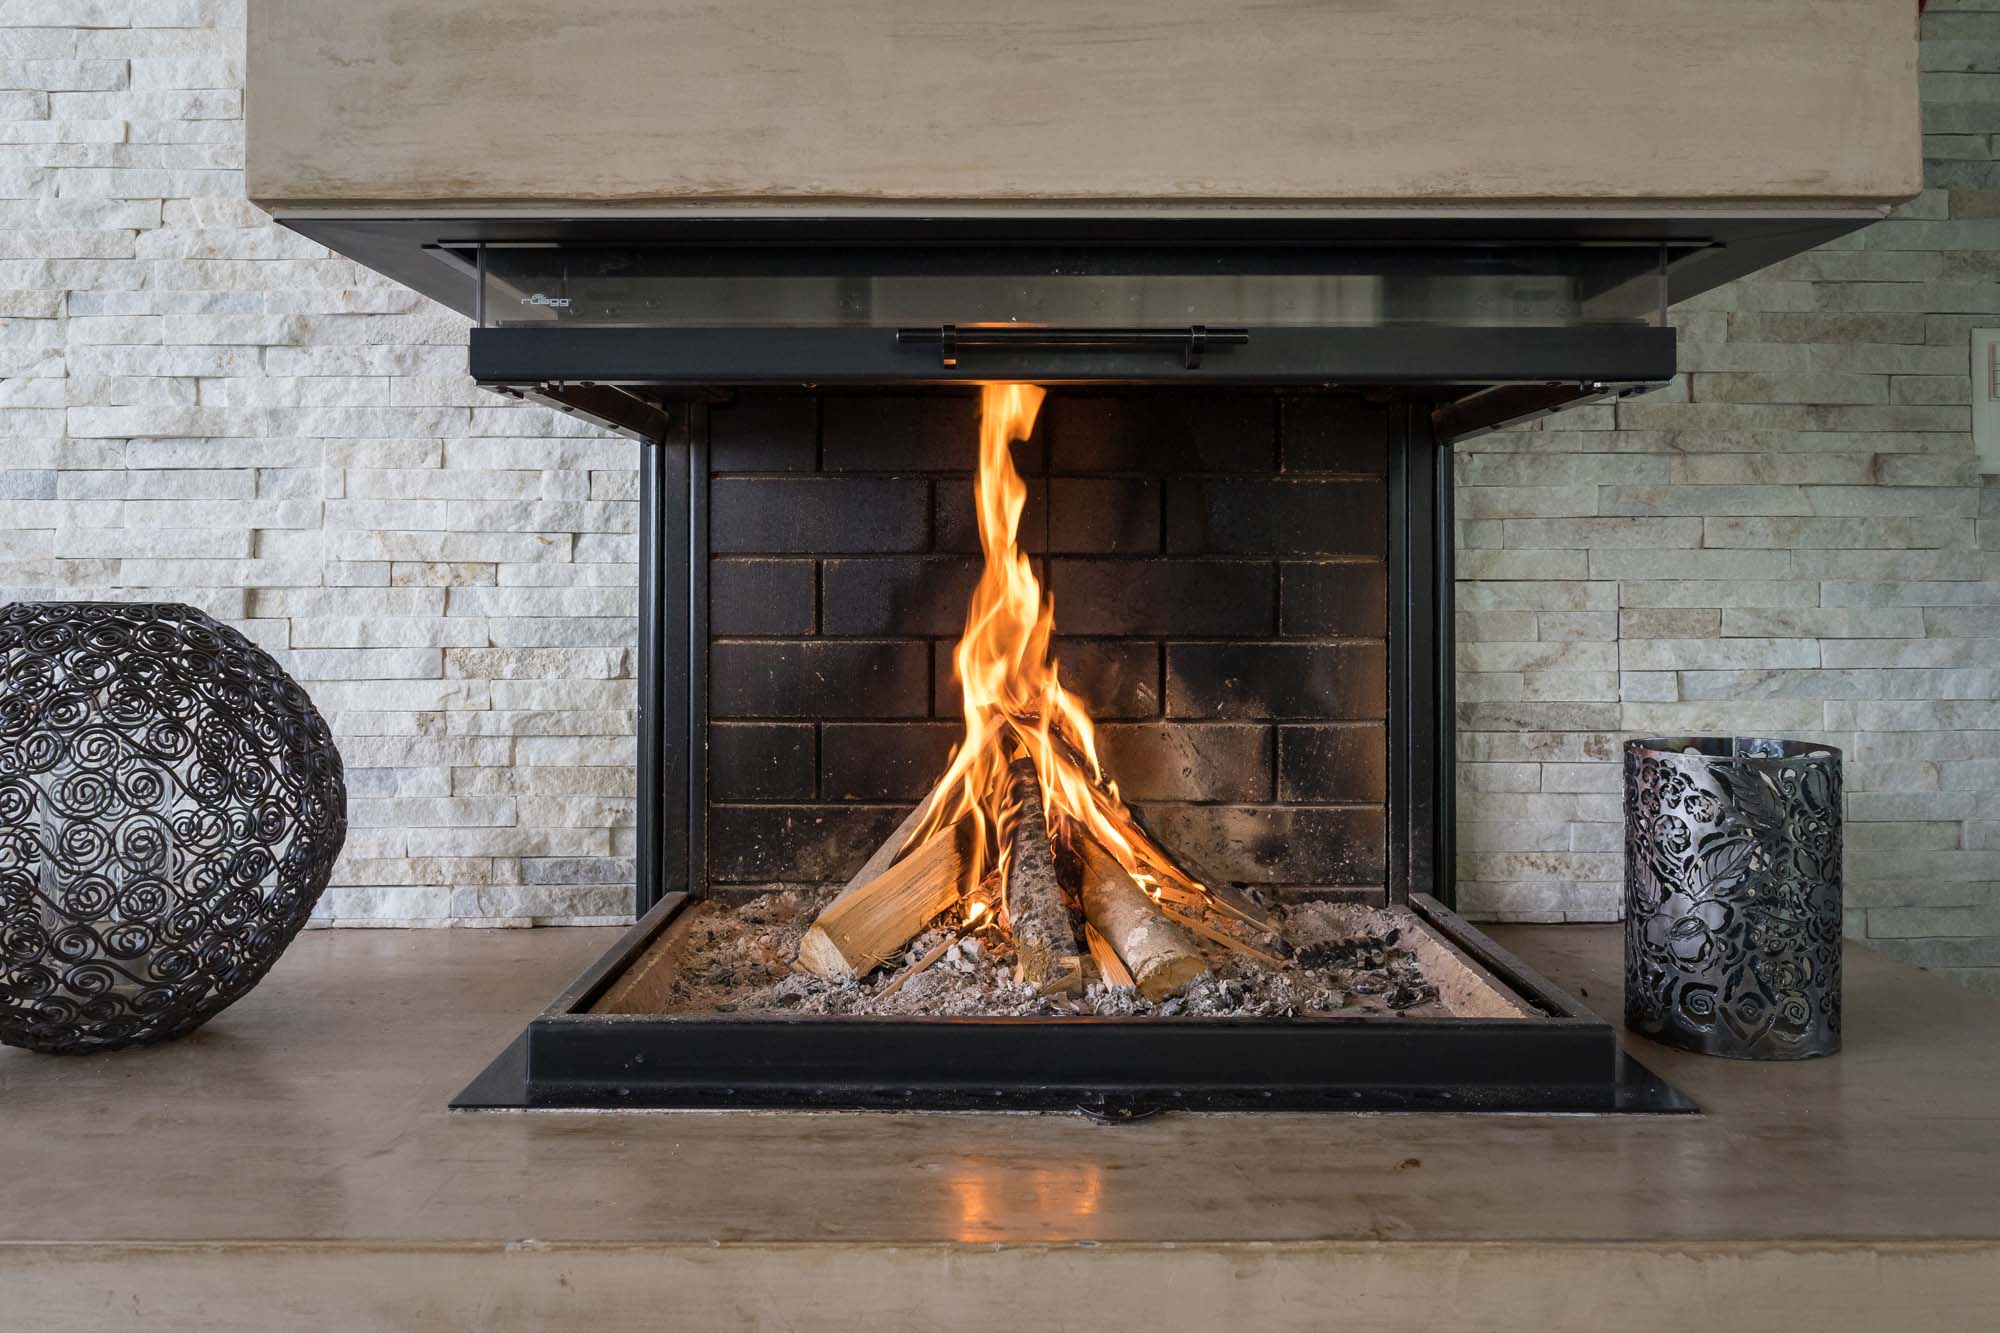 Luxury Fireplace. Fireplace in a modern luxury home with burning fire.